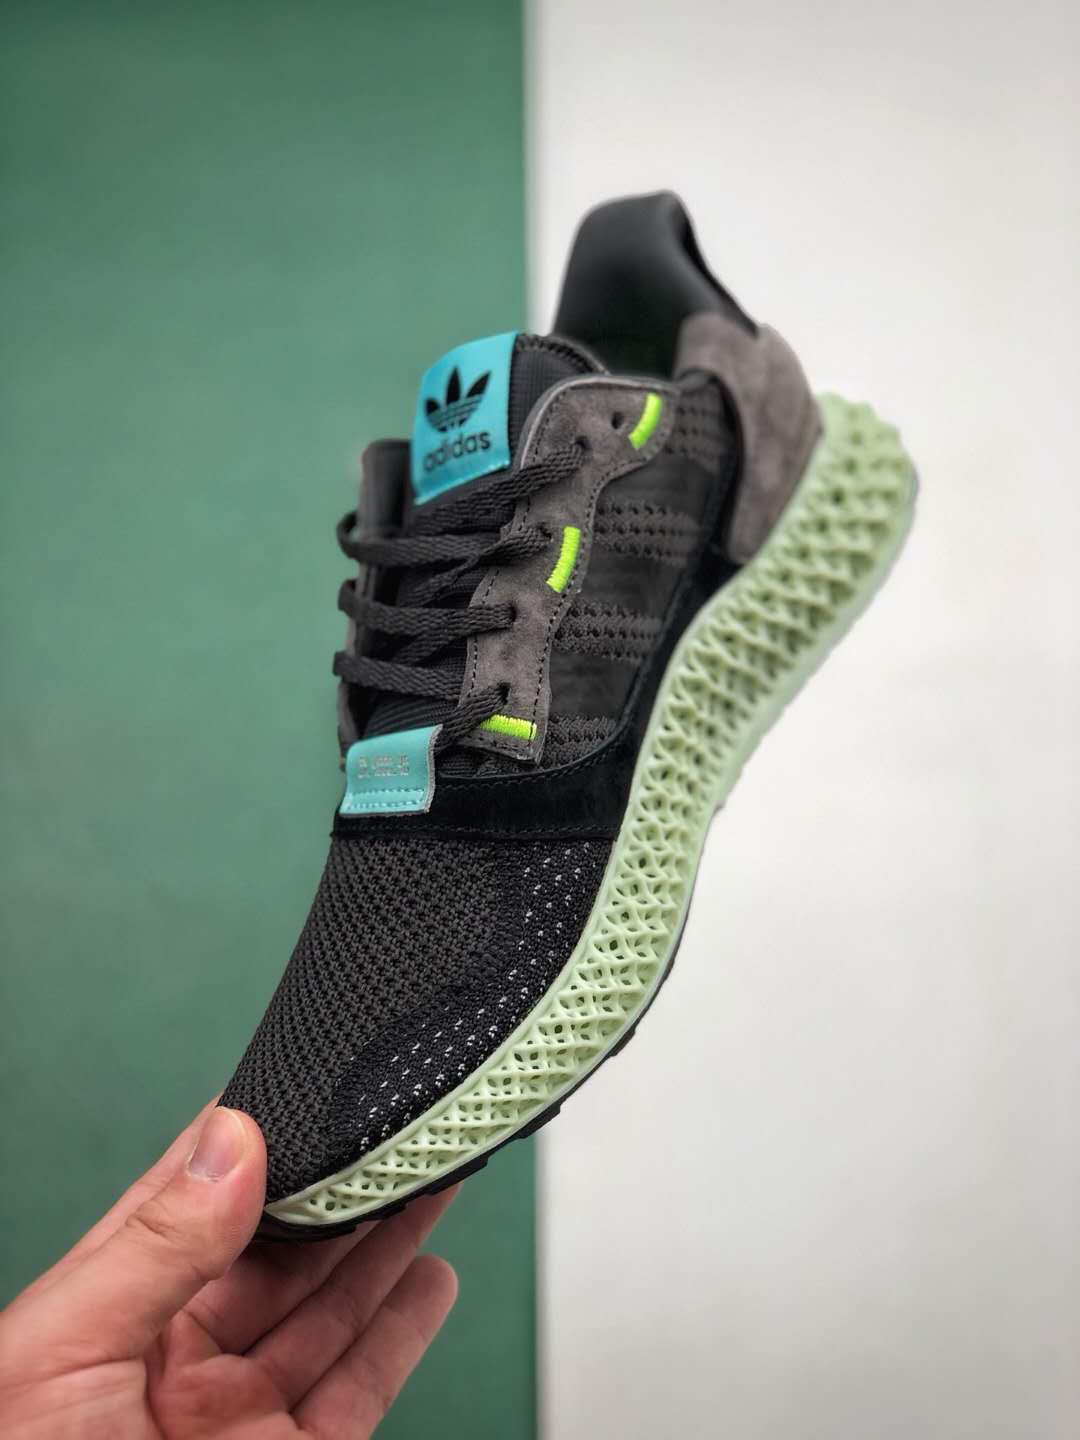 Adidas ZX 4000 Futurecraft 4D Carbon BD7865 - Innovative Comfort and Style